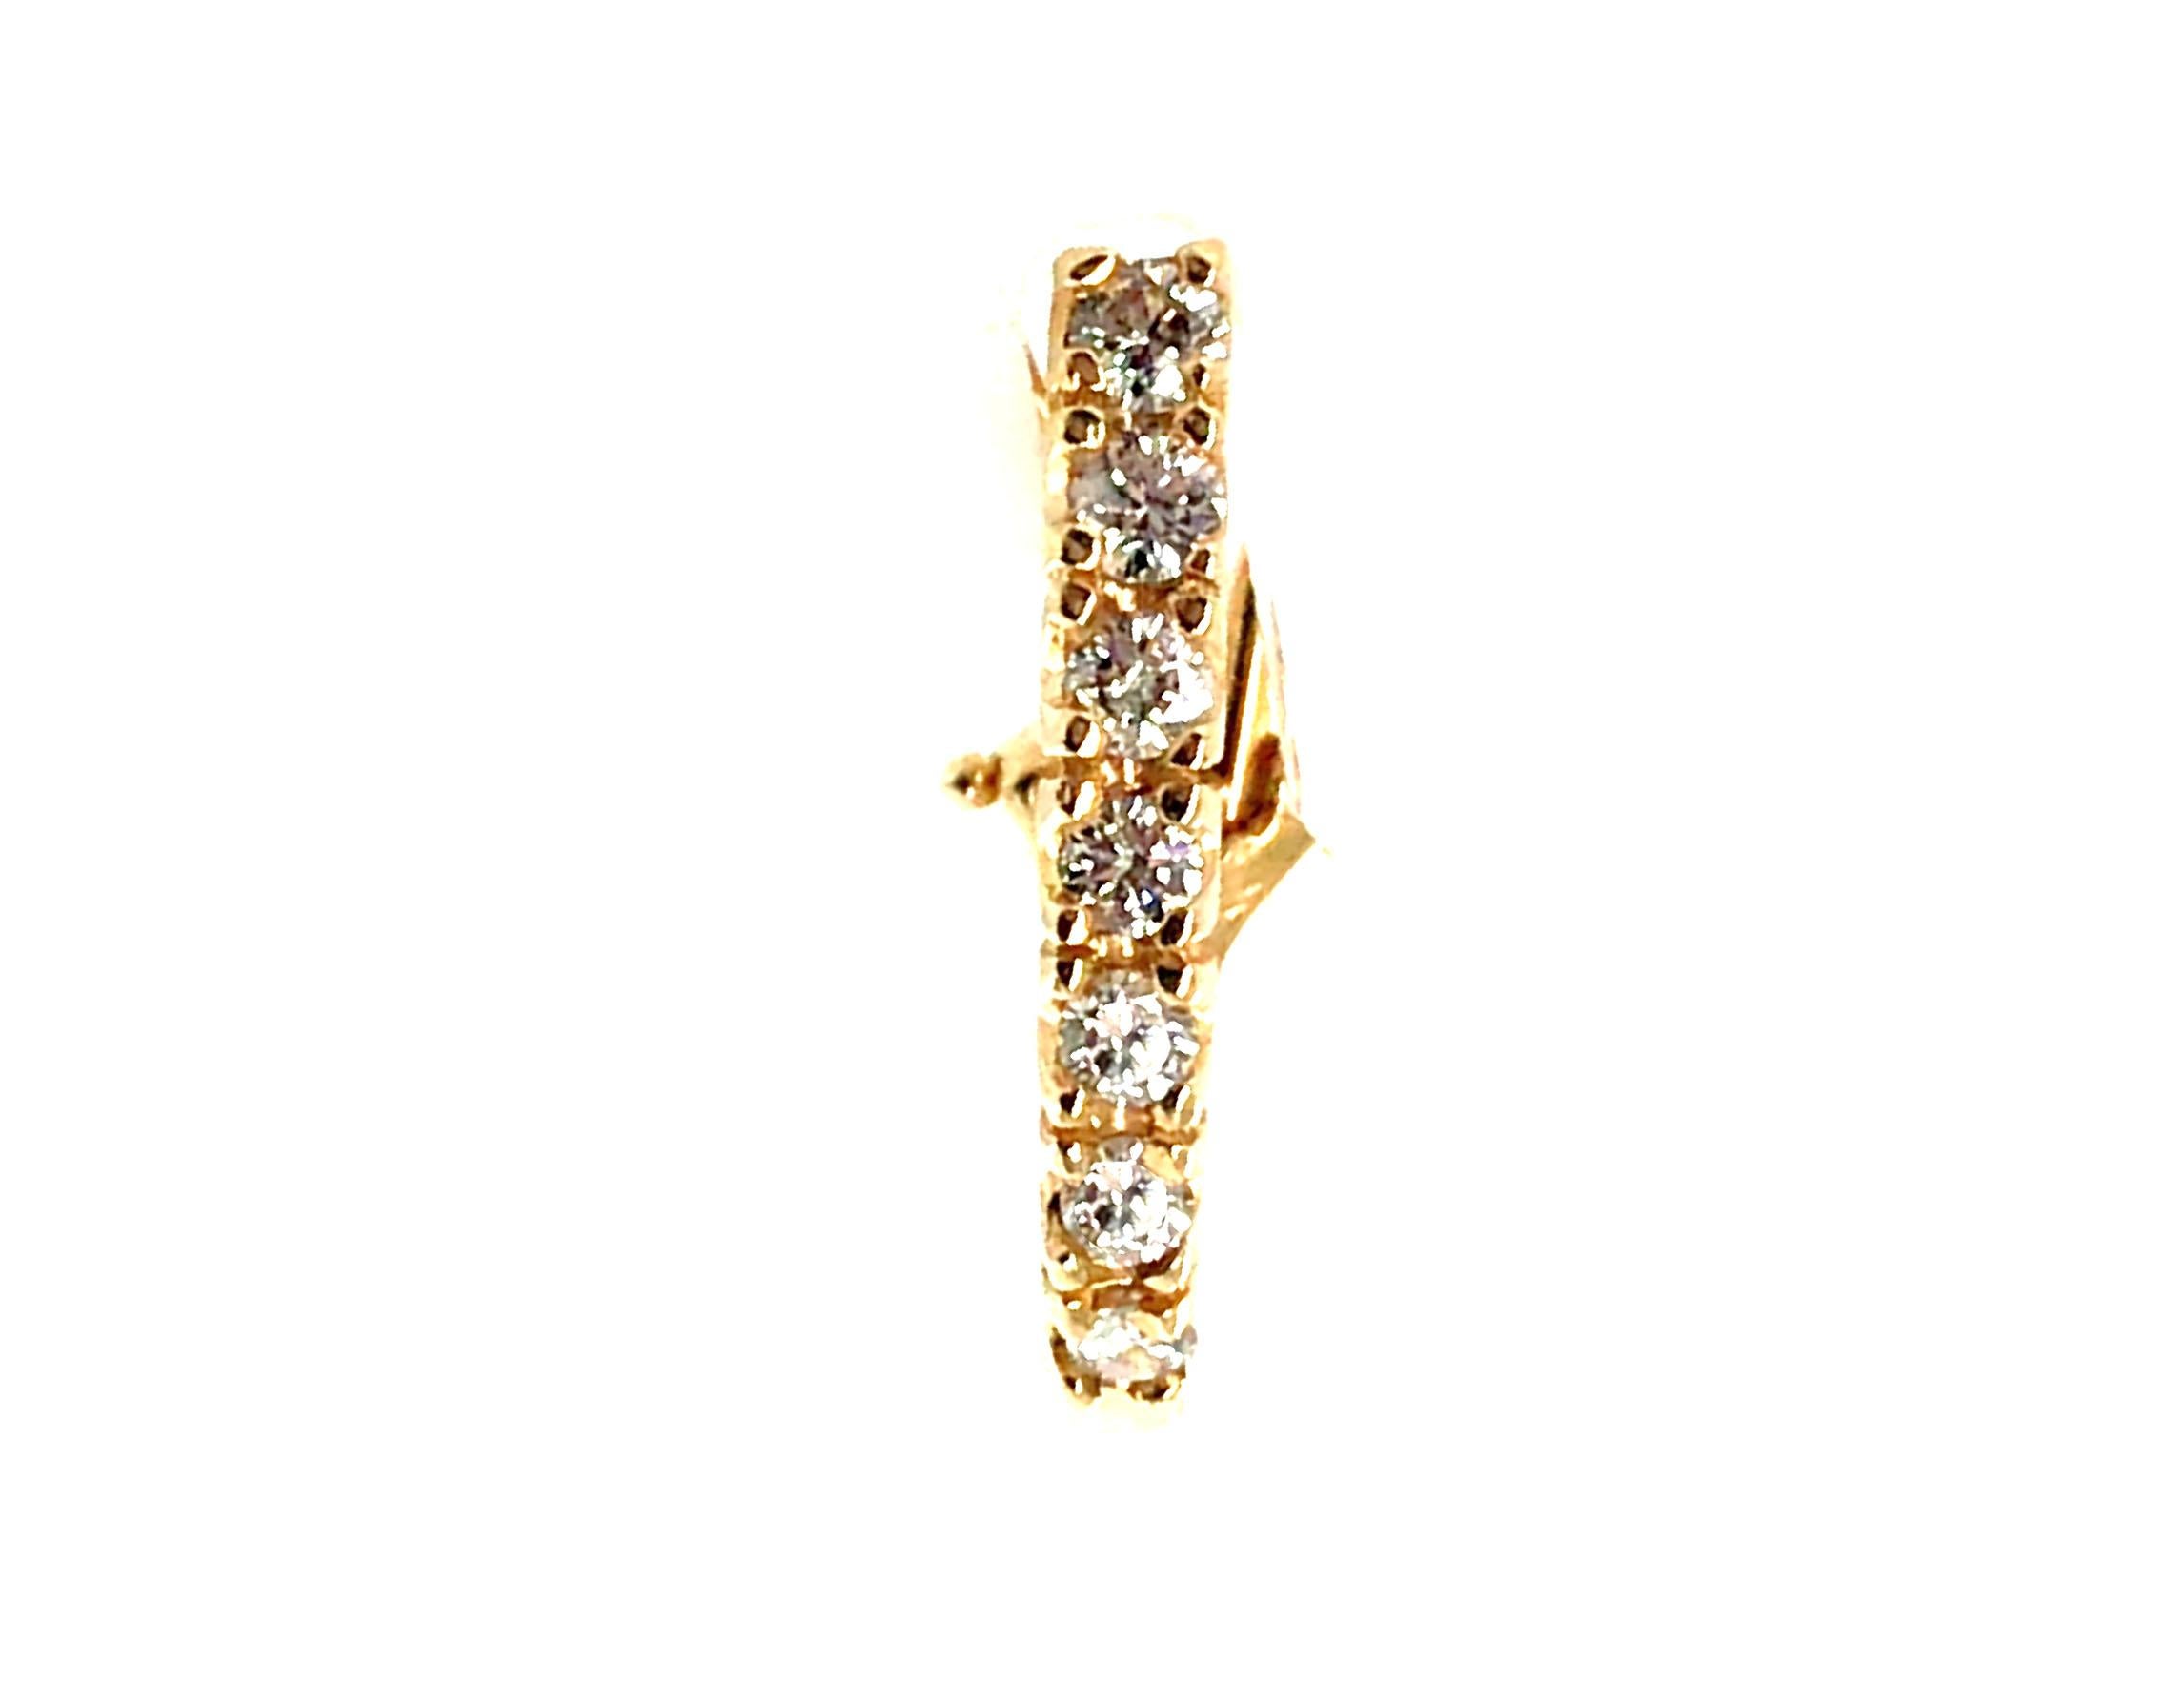 Diamond .25ct Huggie Hoop Single Earring 14K Yellow Gold French Back


Over $70 in Gold Value Alone

100% Natural Diamonds

.25 Carat Diamond Weight

Solid 14K Yellow Gold

Simple Yet Elegant 

Perfect Gift

Excellent Condition 

***313***846***3700